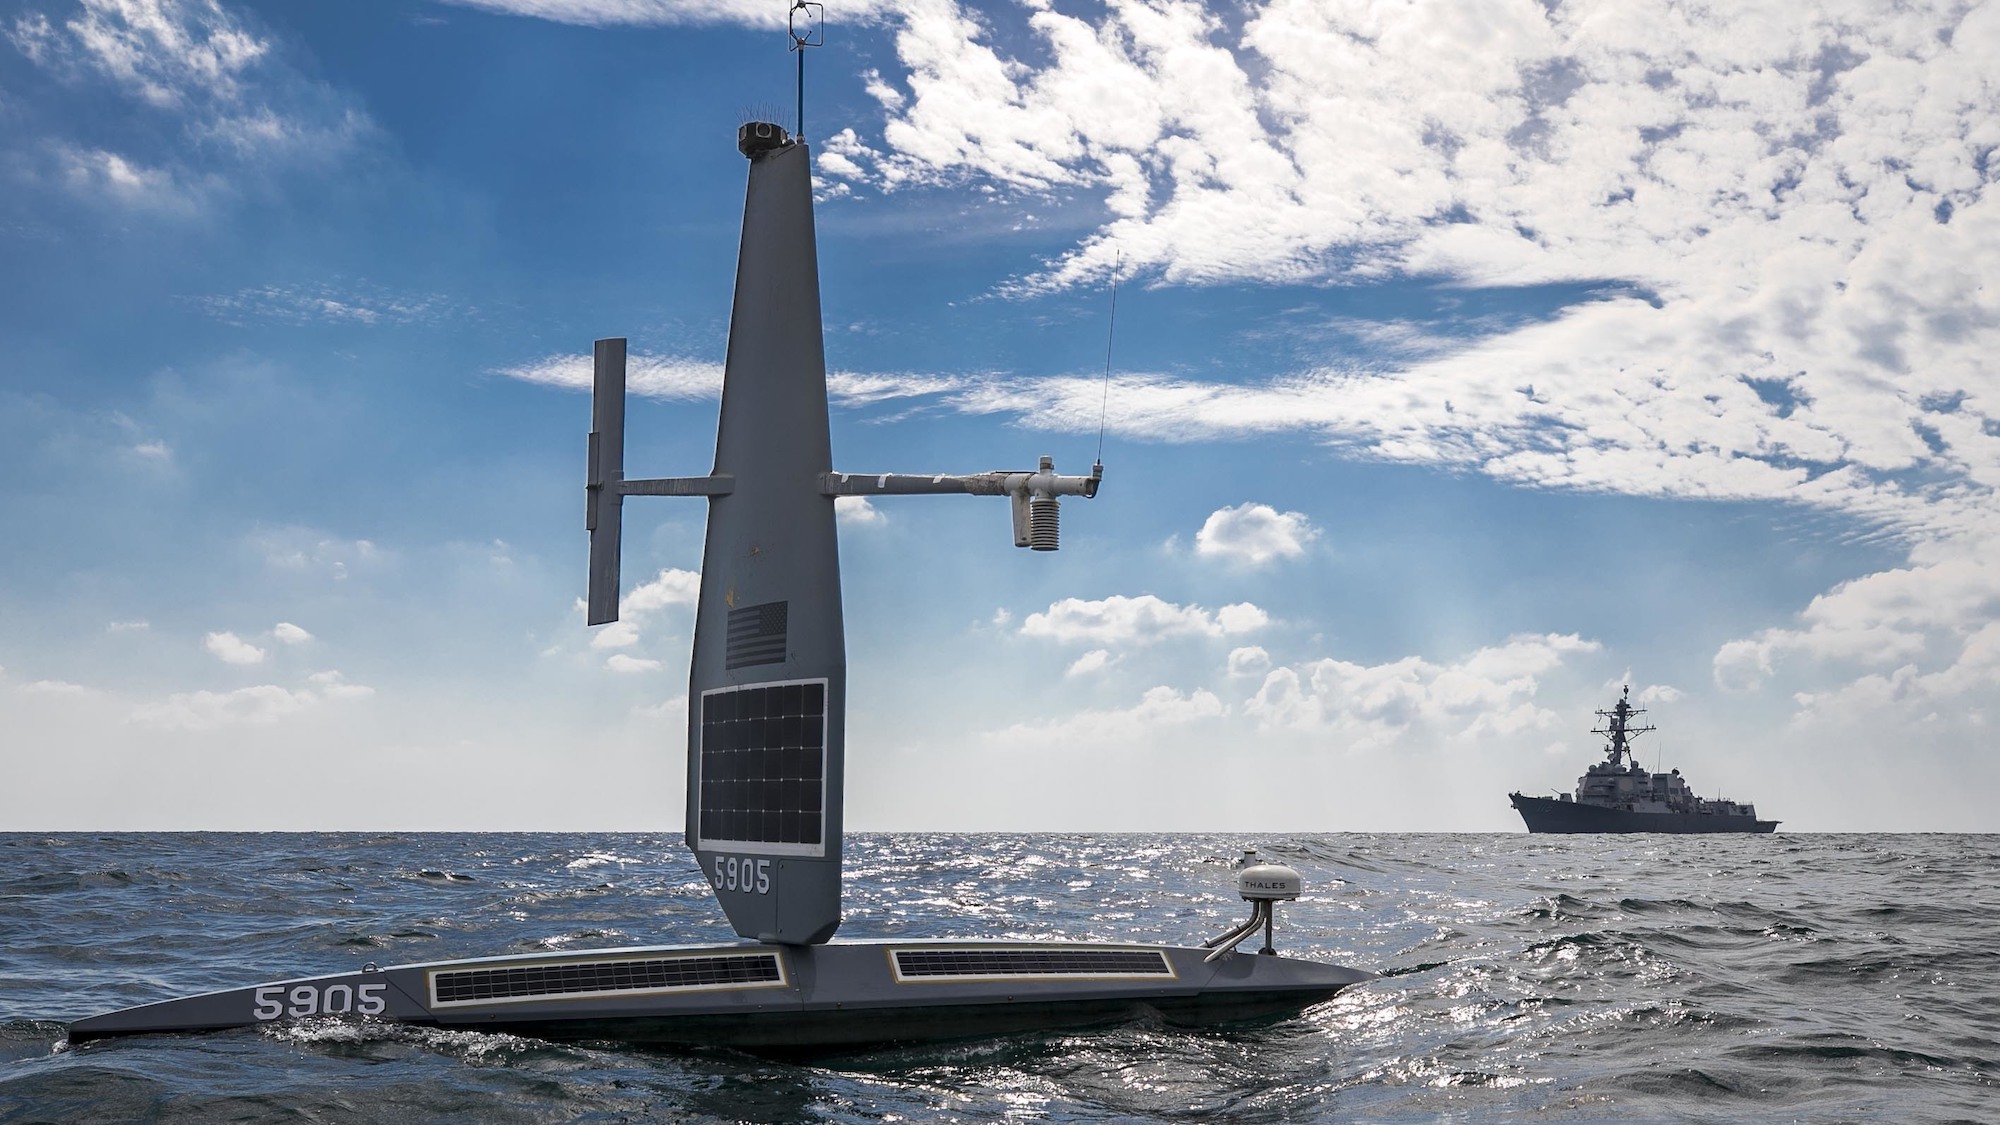 The US Navy used solar-powered Saildrones to scout in the Persian Gulf